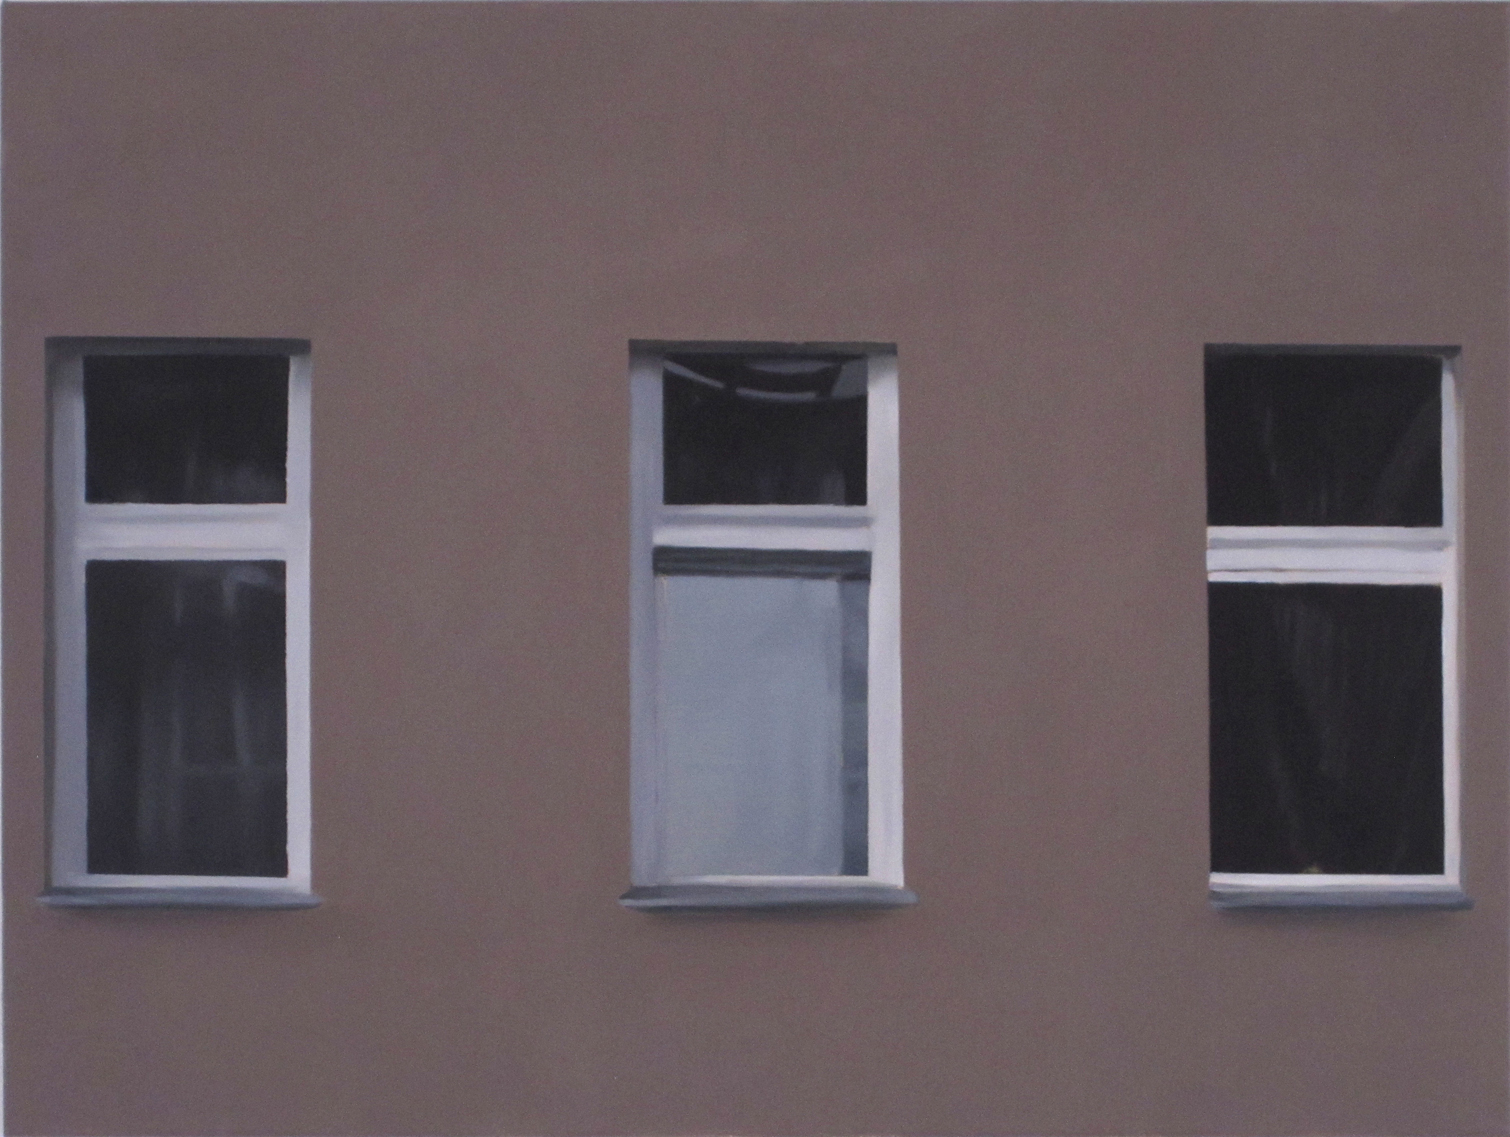 Don't Worry About Me (left), 2012, oil on canvas, 50x70cm